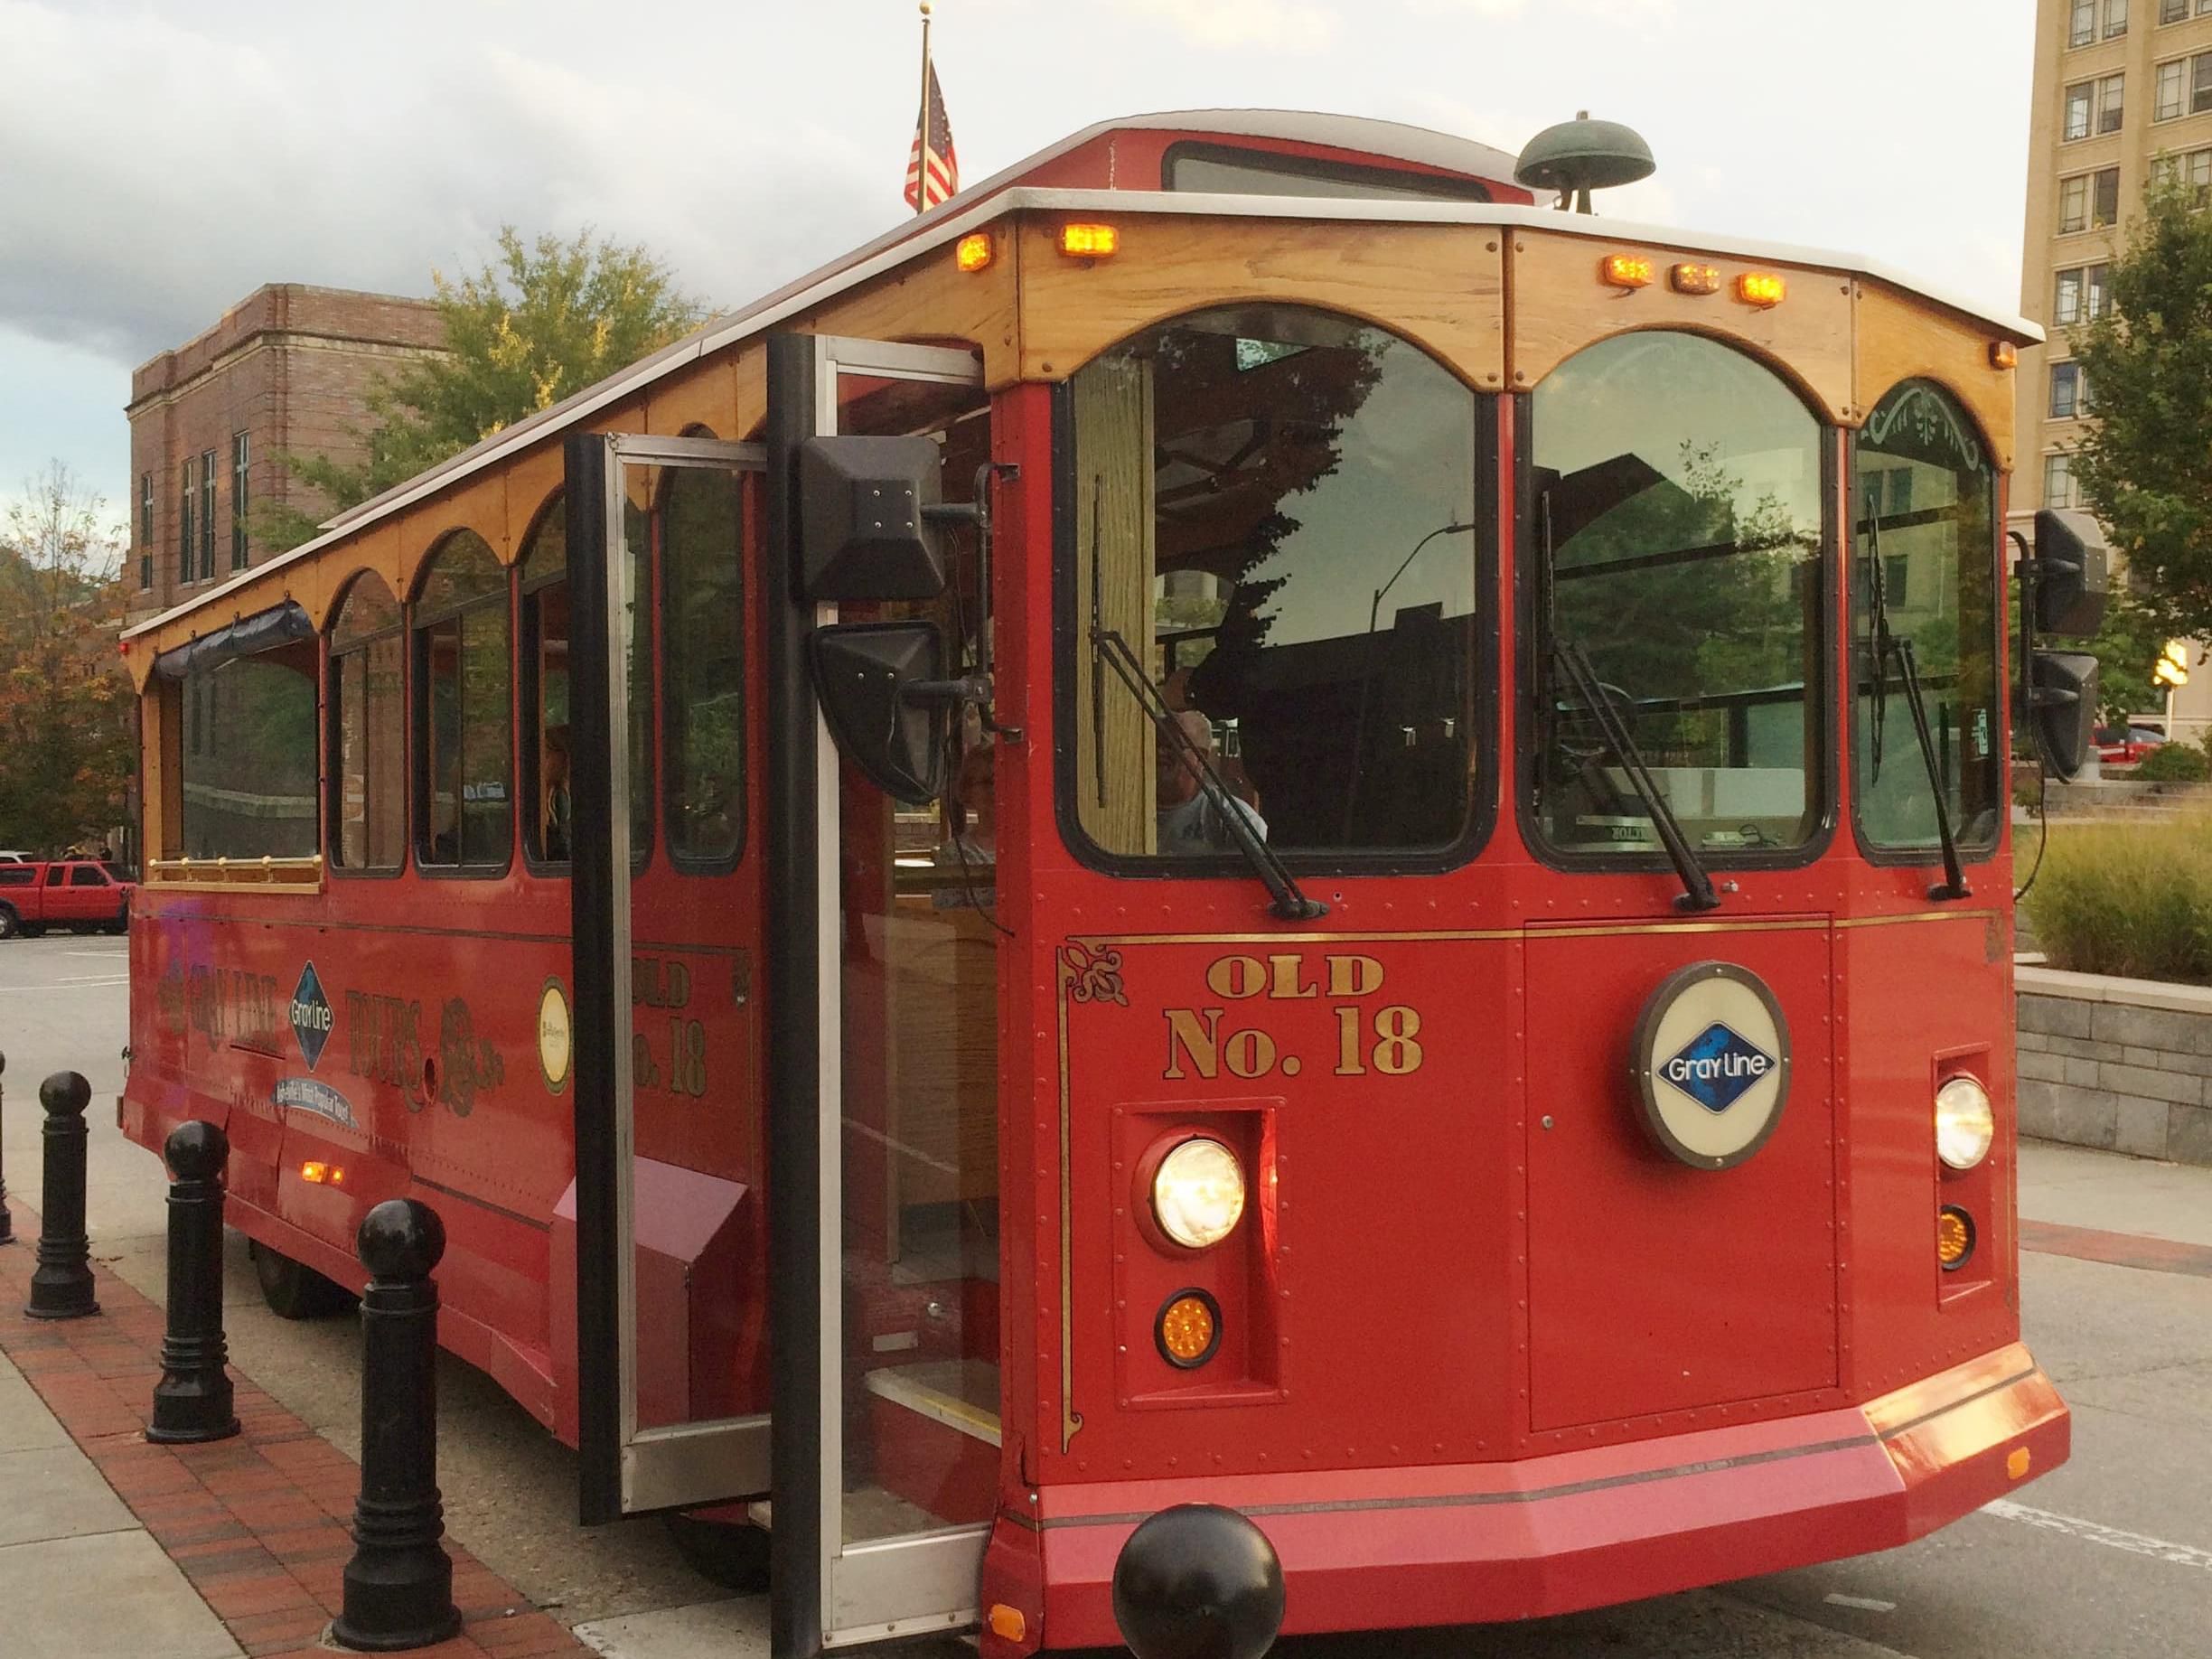 Trolley Tour and Breakfast